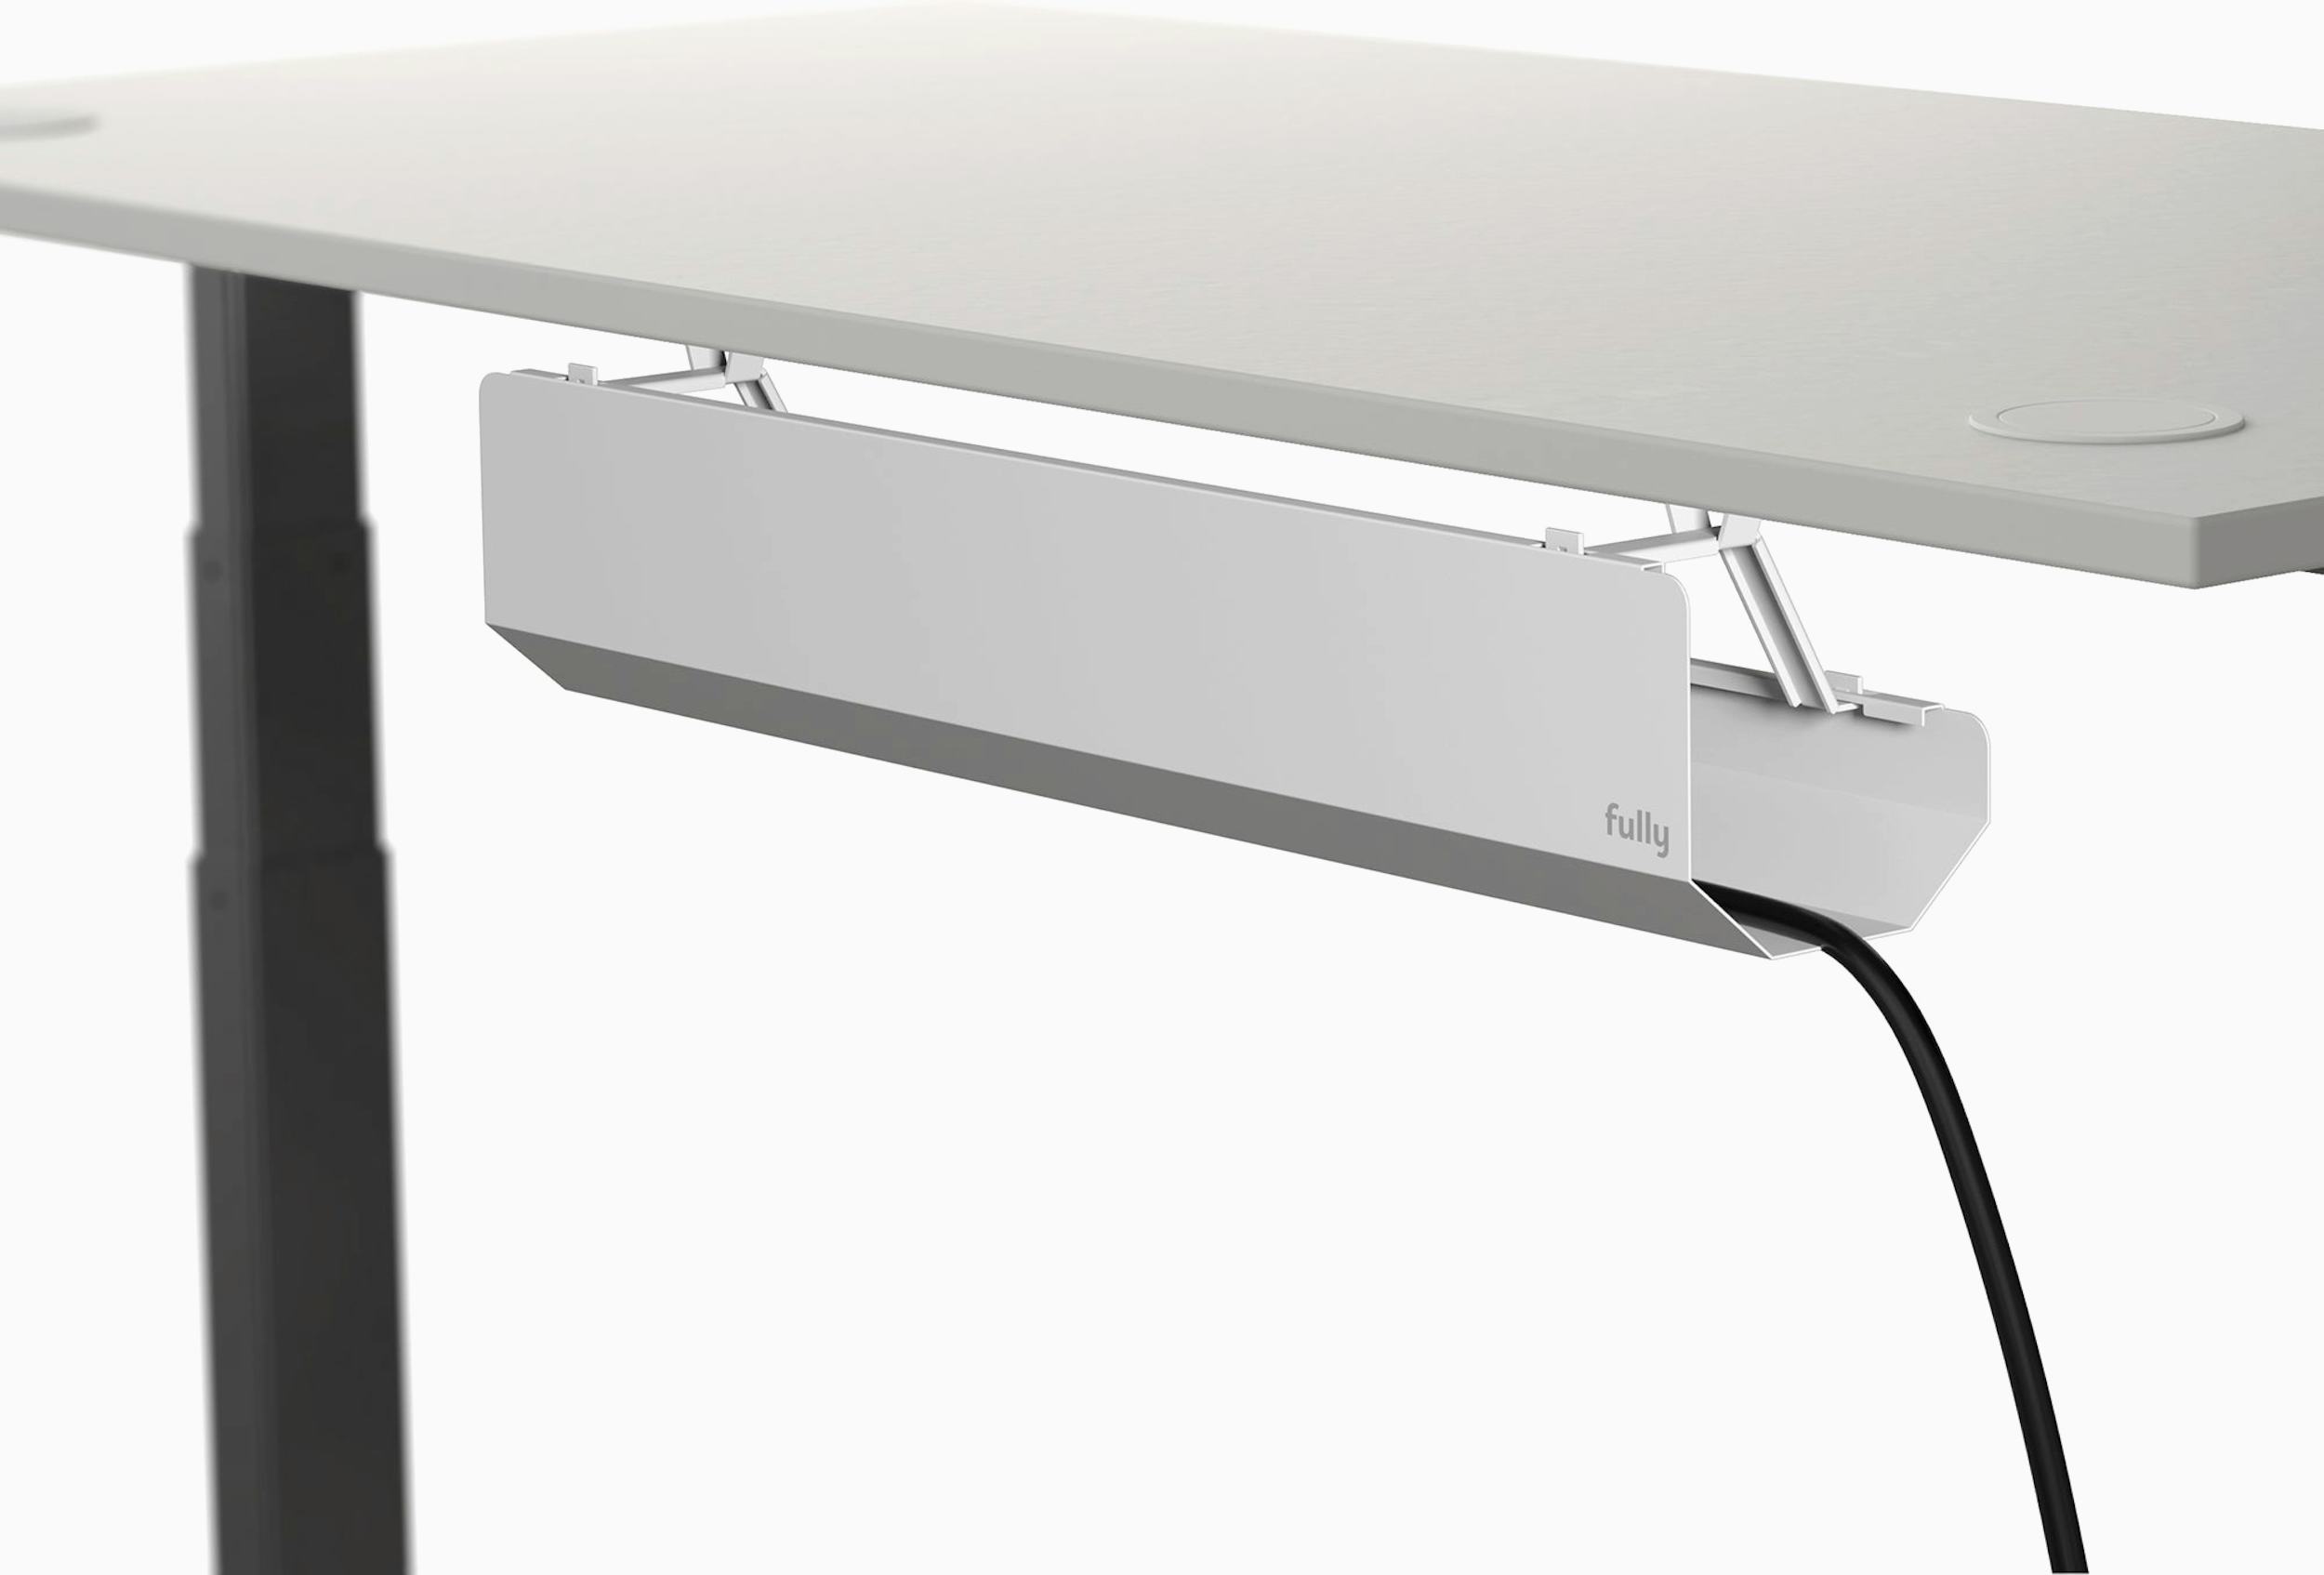 https://images.hermanmiller.group/m/33a5079e79561fc7/W-Fully_Cable_Tray_white_d1.png?trim=auto&trim-sd=1&blend-mode=darken&blend=fafafa&bg=fafafa&auto=format&w=2500&h=2500&q=50